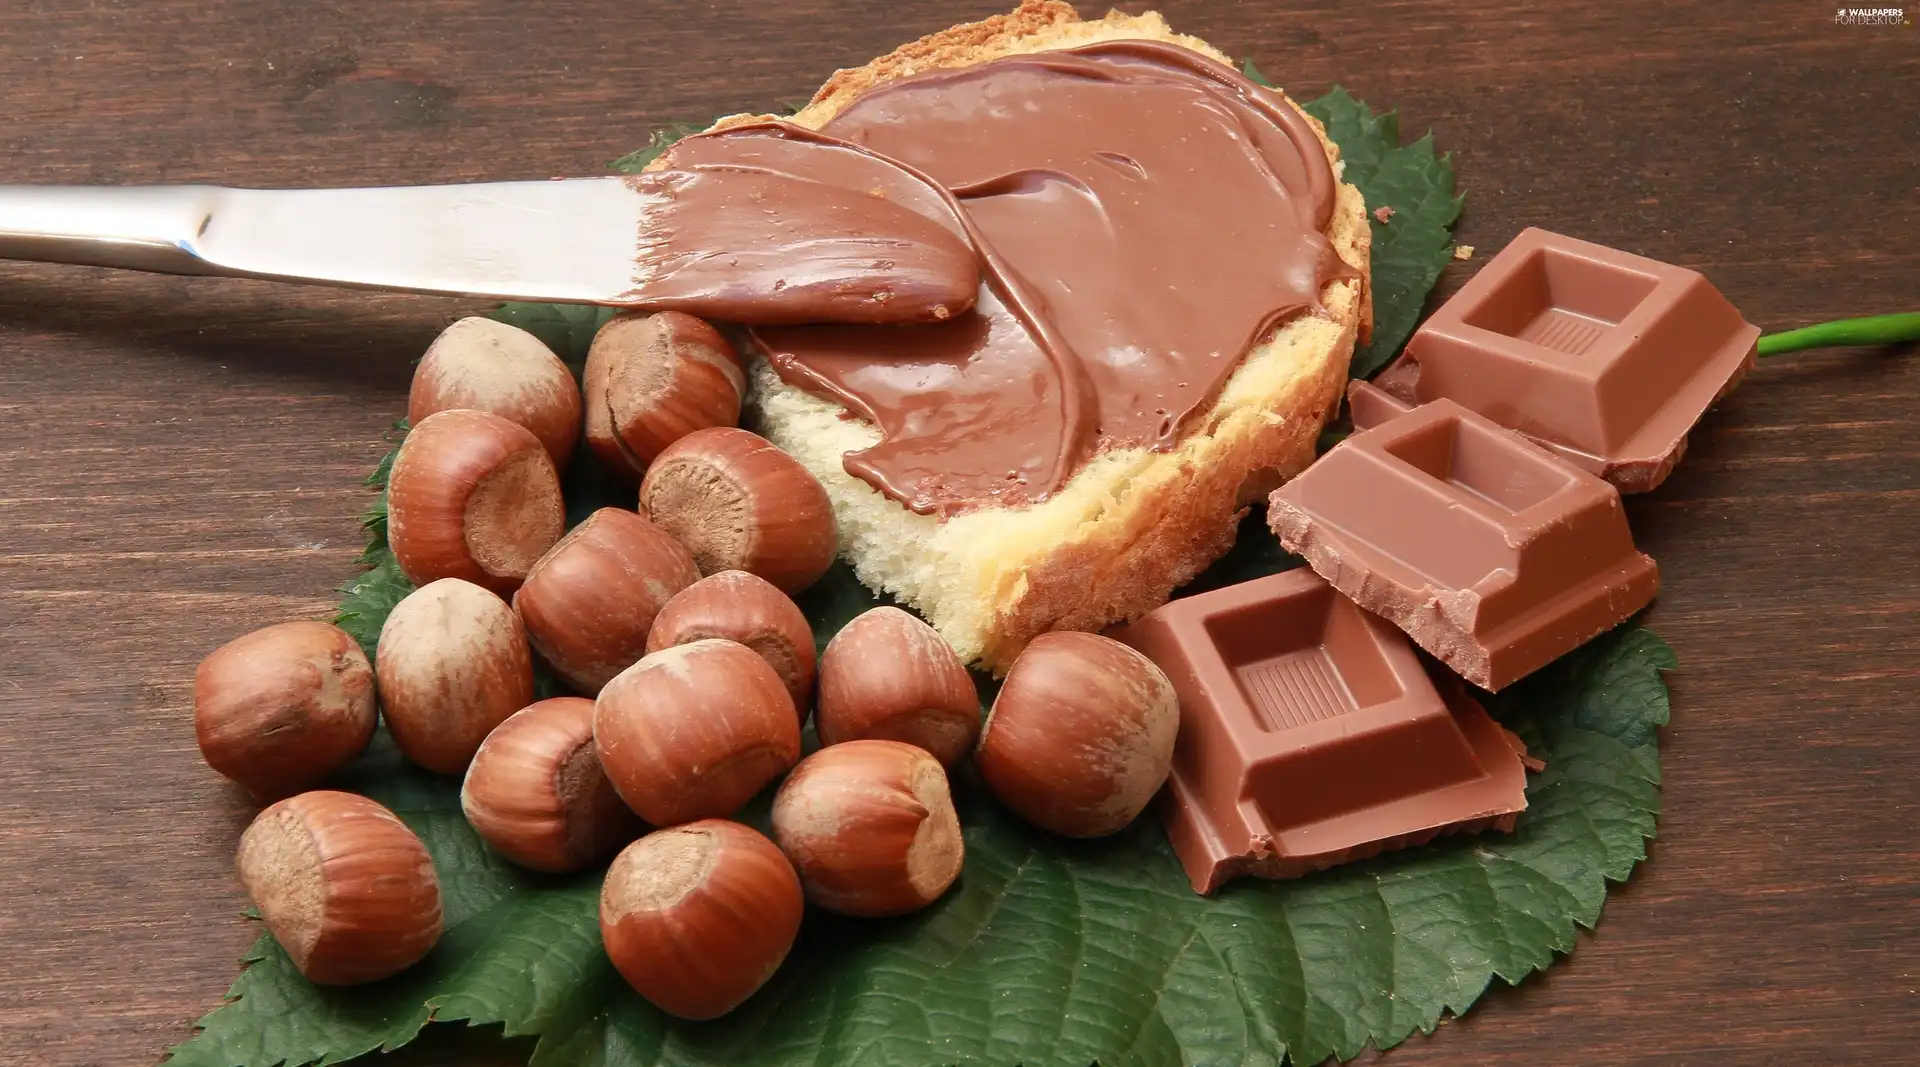 bread, chocolate, nuts